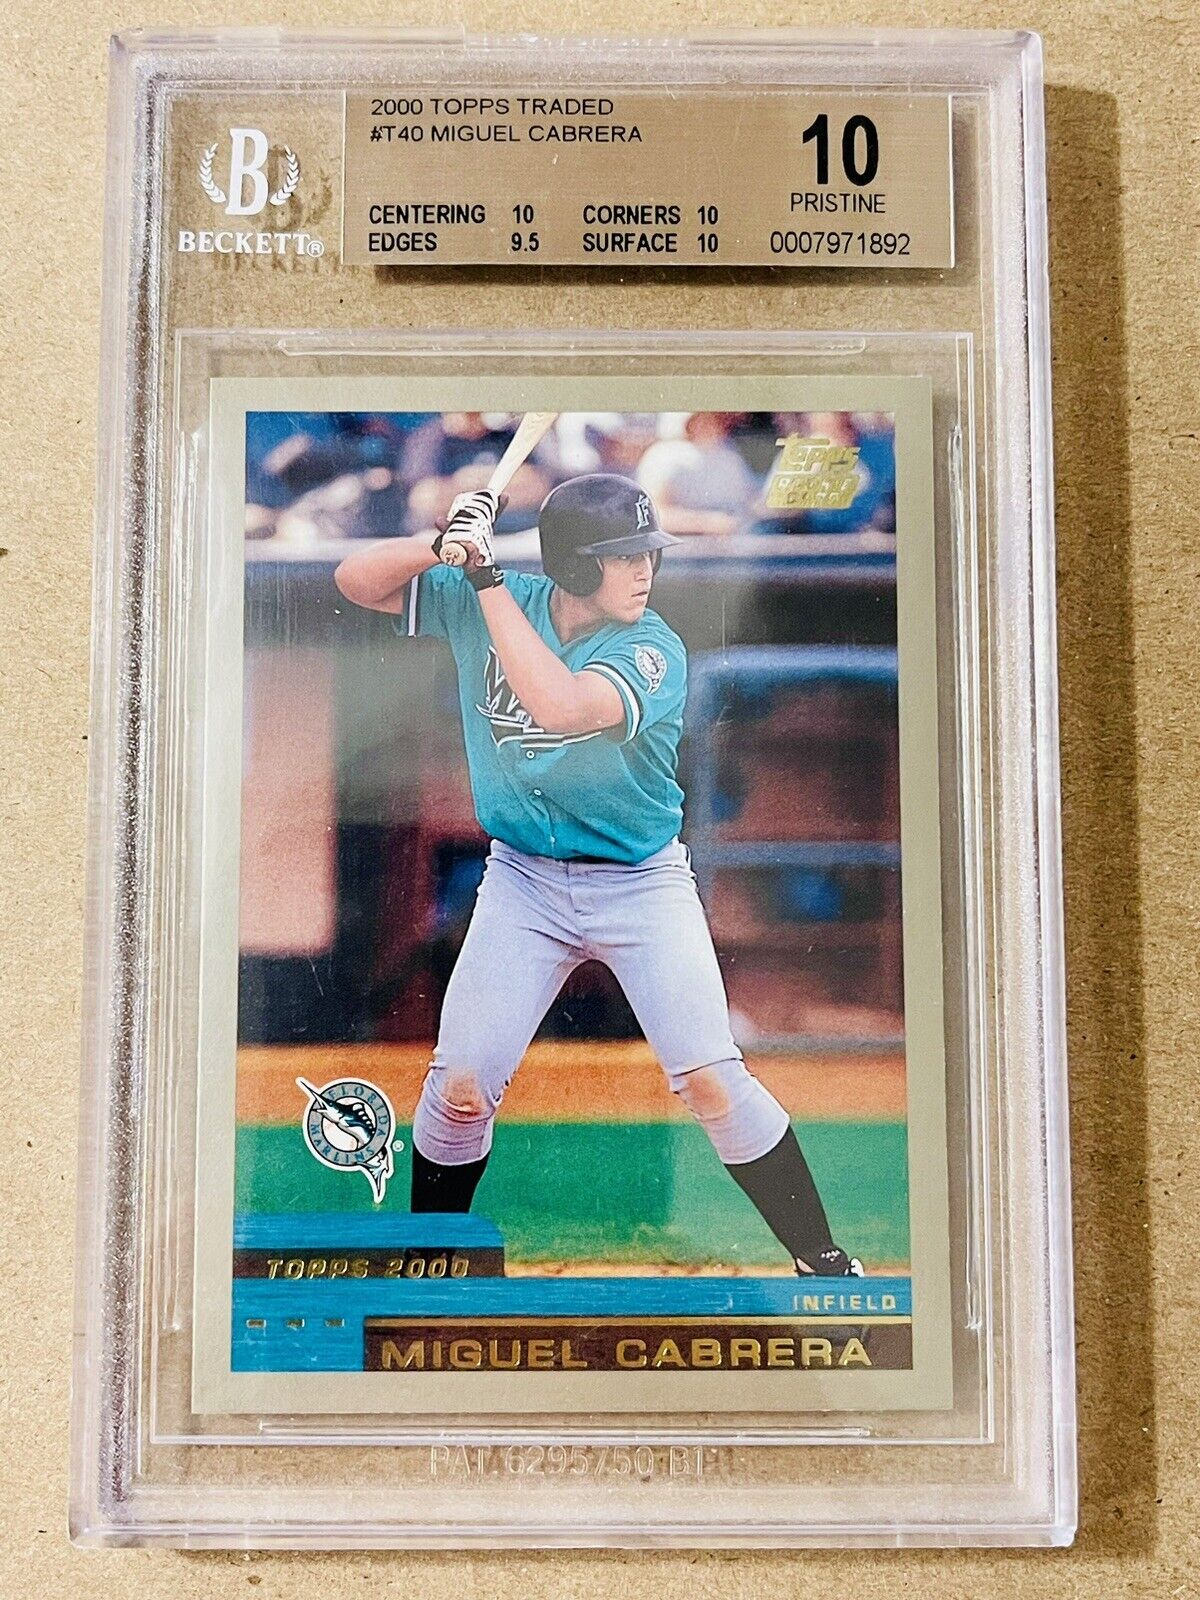 Miguel Cabrera 2000 Topps Traded Rookie RC BGS 10 PRISTINE #T40